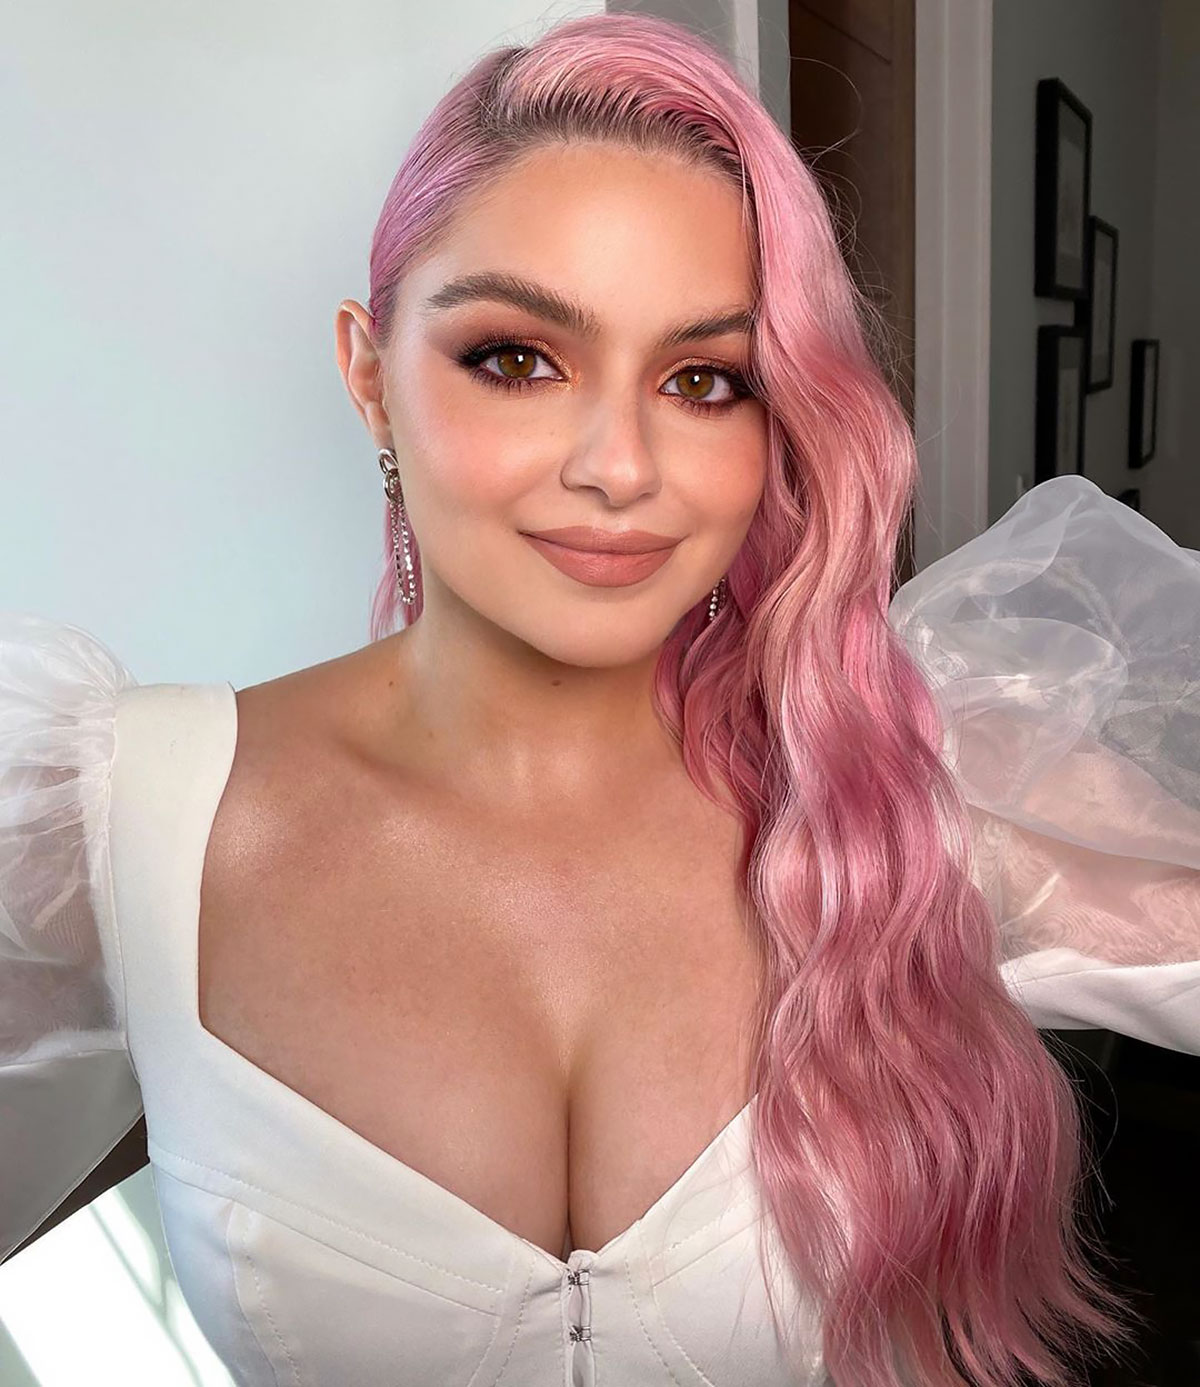 Hot Naked Girl: Ariel Winter Information And Beautiful 